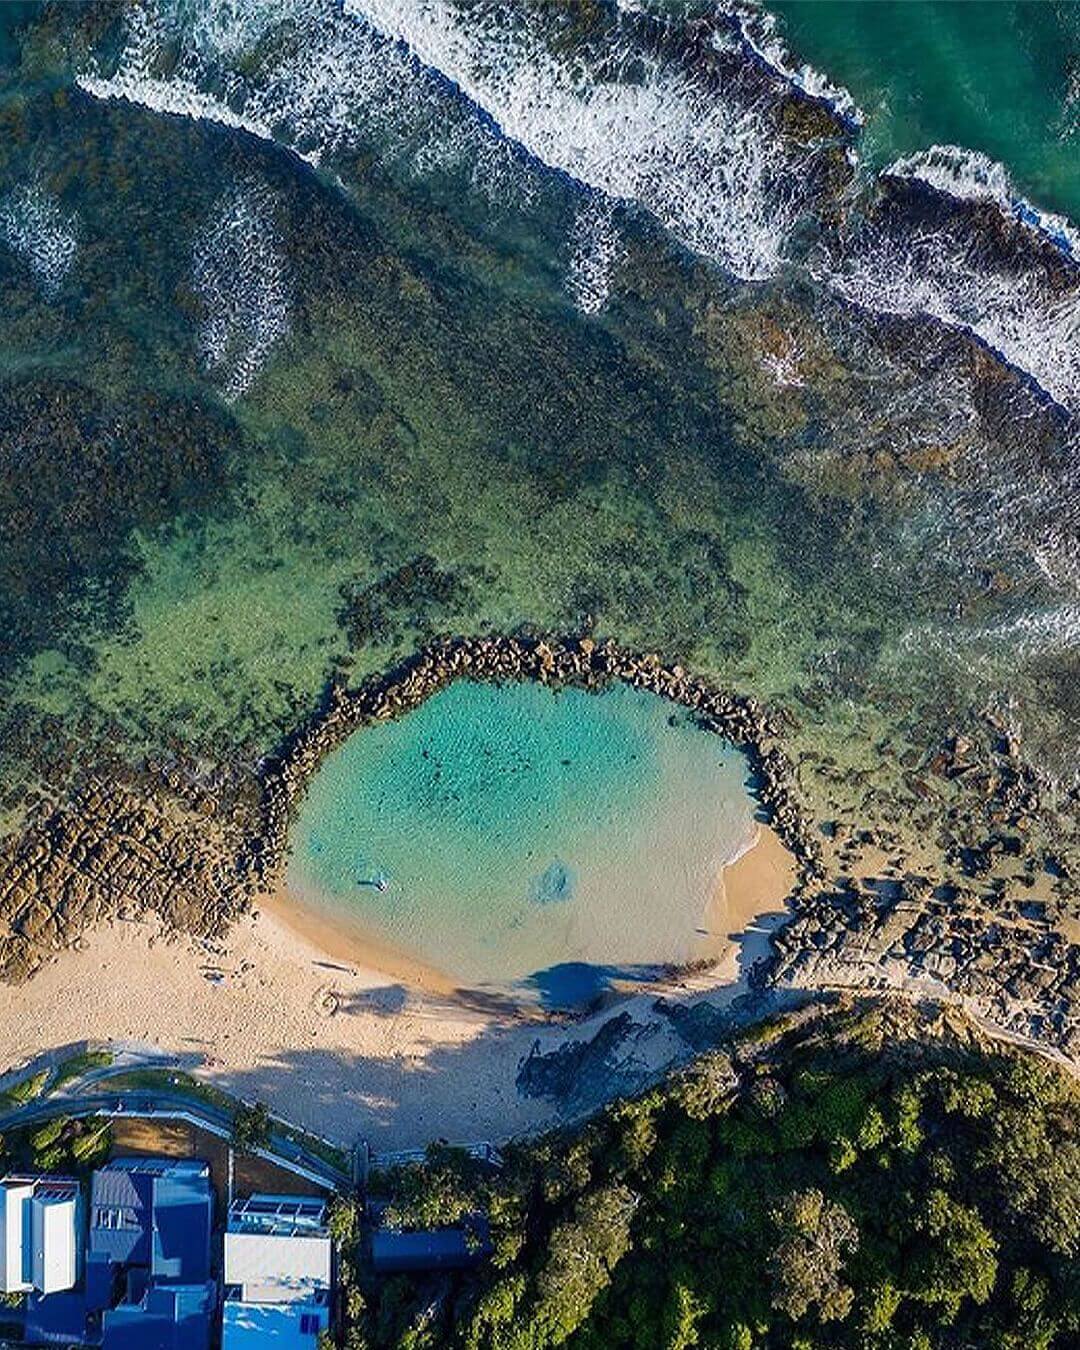 norah head rockpool from above